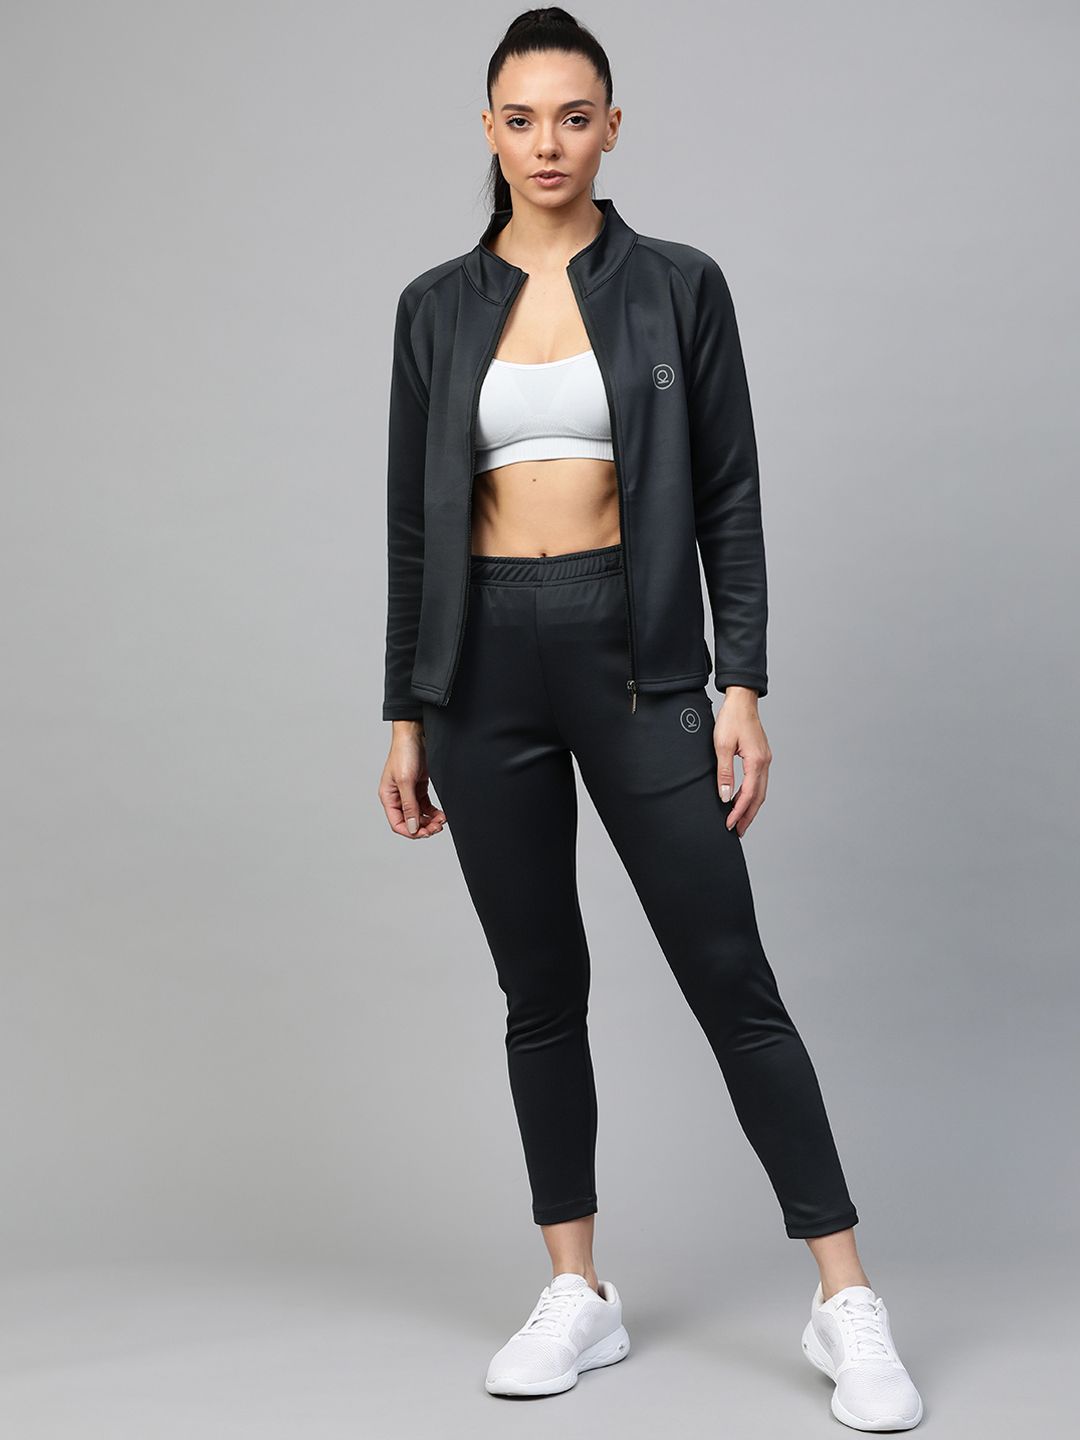 Chkokko Women Charcoal Grey Solid Training Tracksuit Price in India